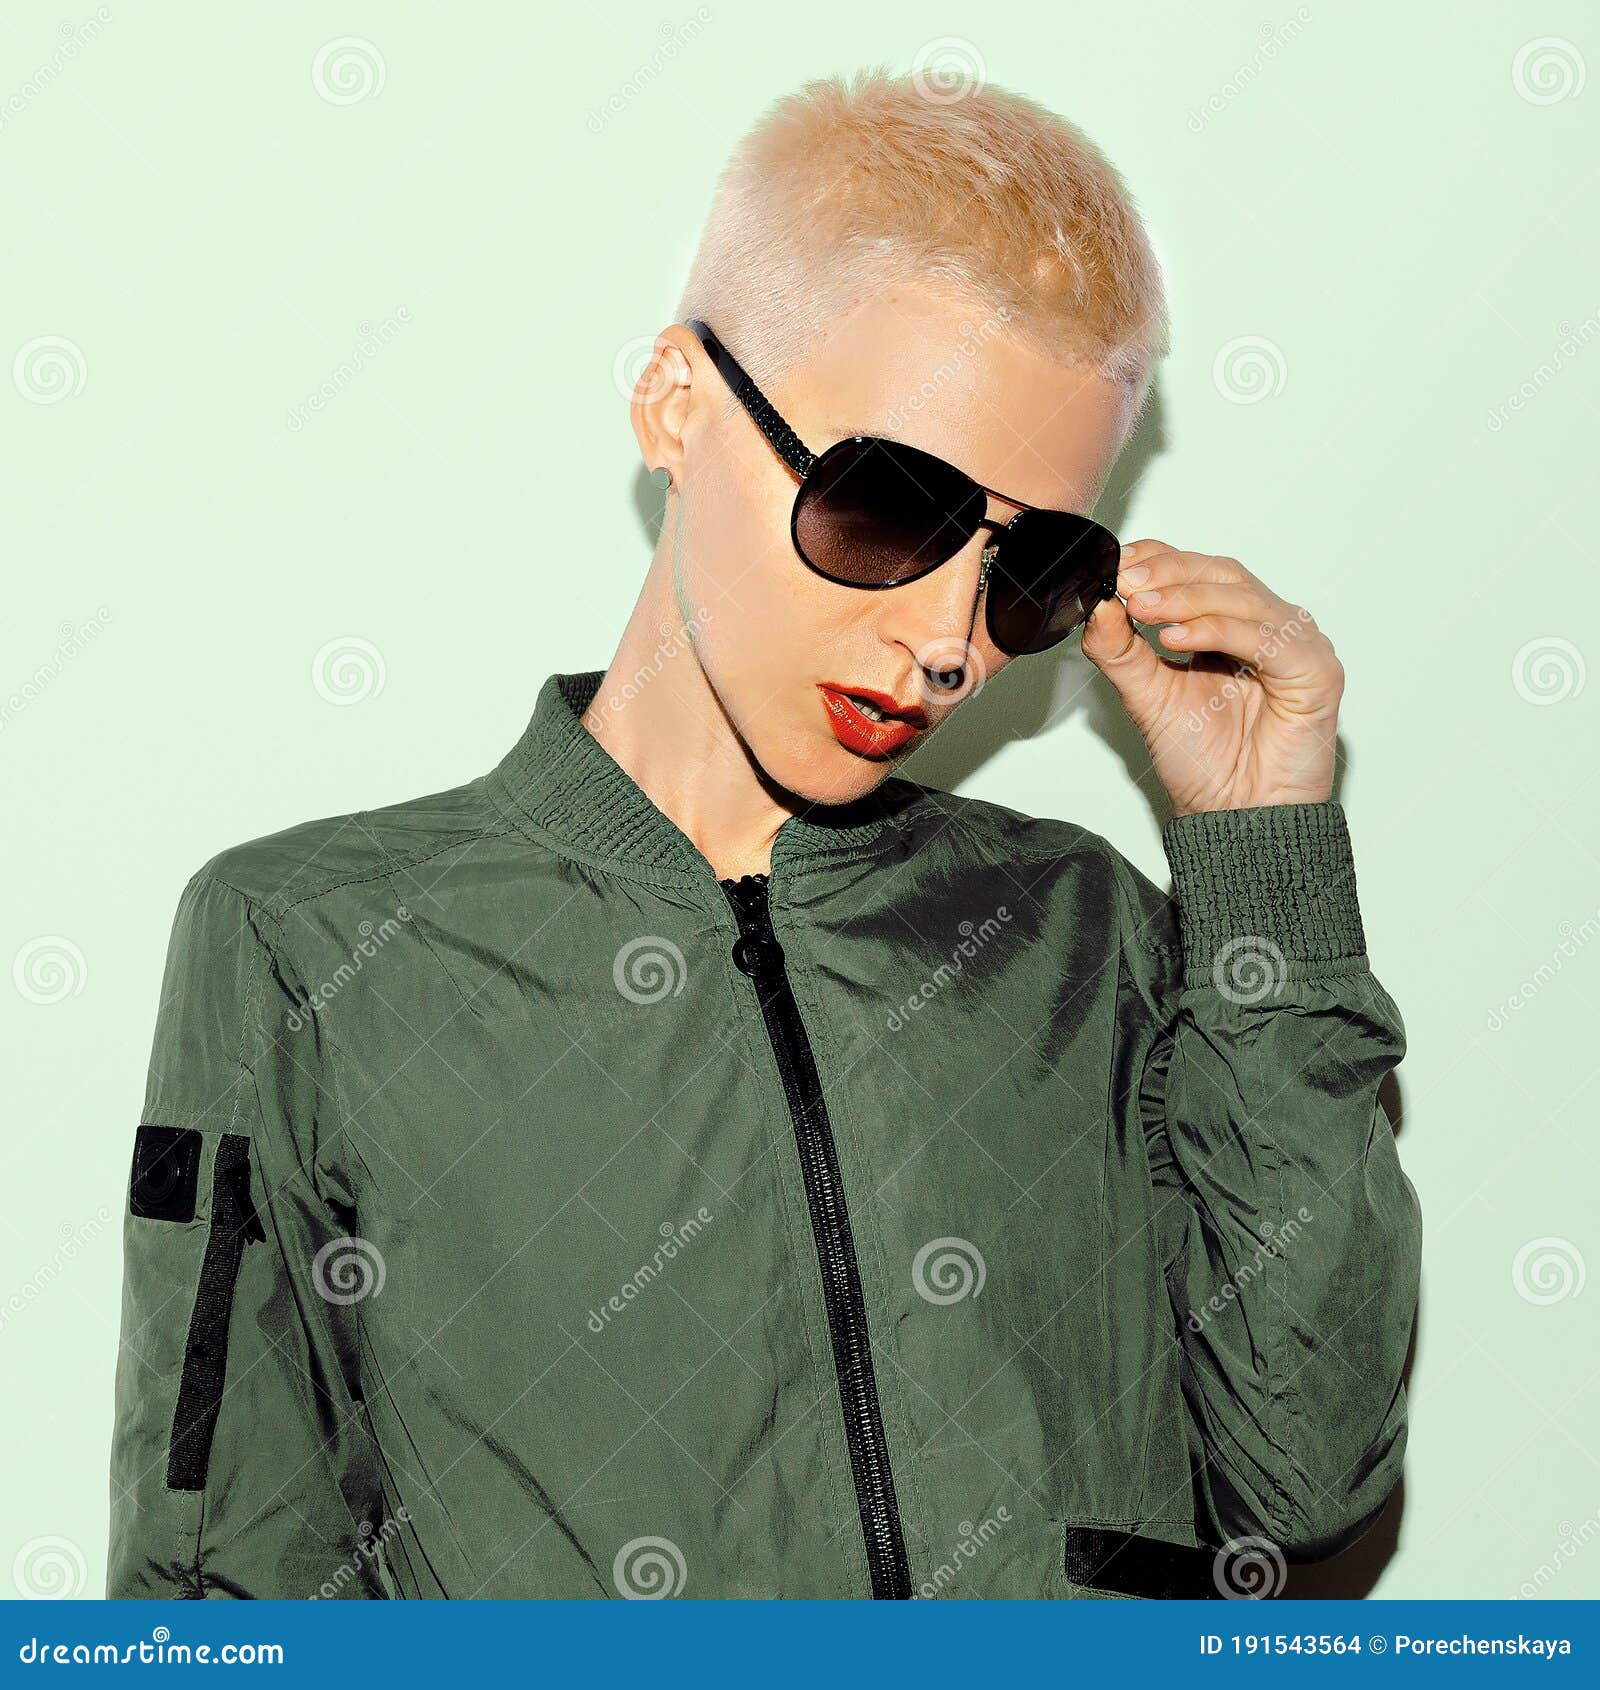 Blonde Model in Military Style and Fashion Sunglasses Stock Photo ...